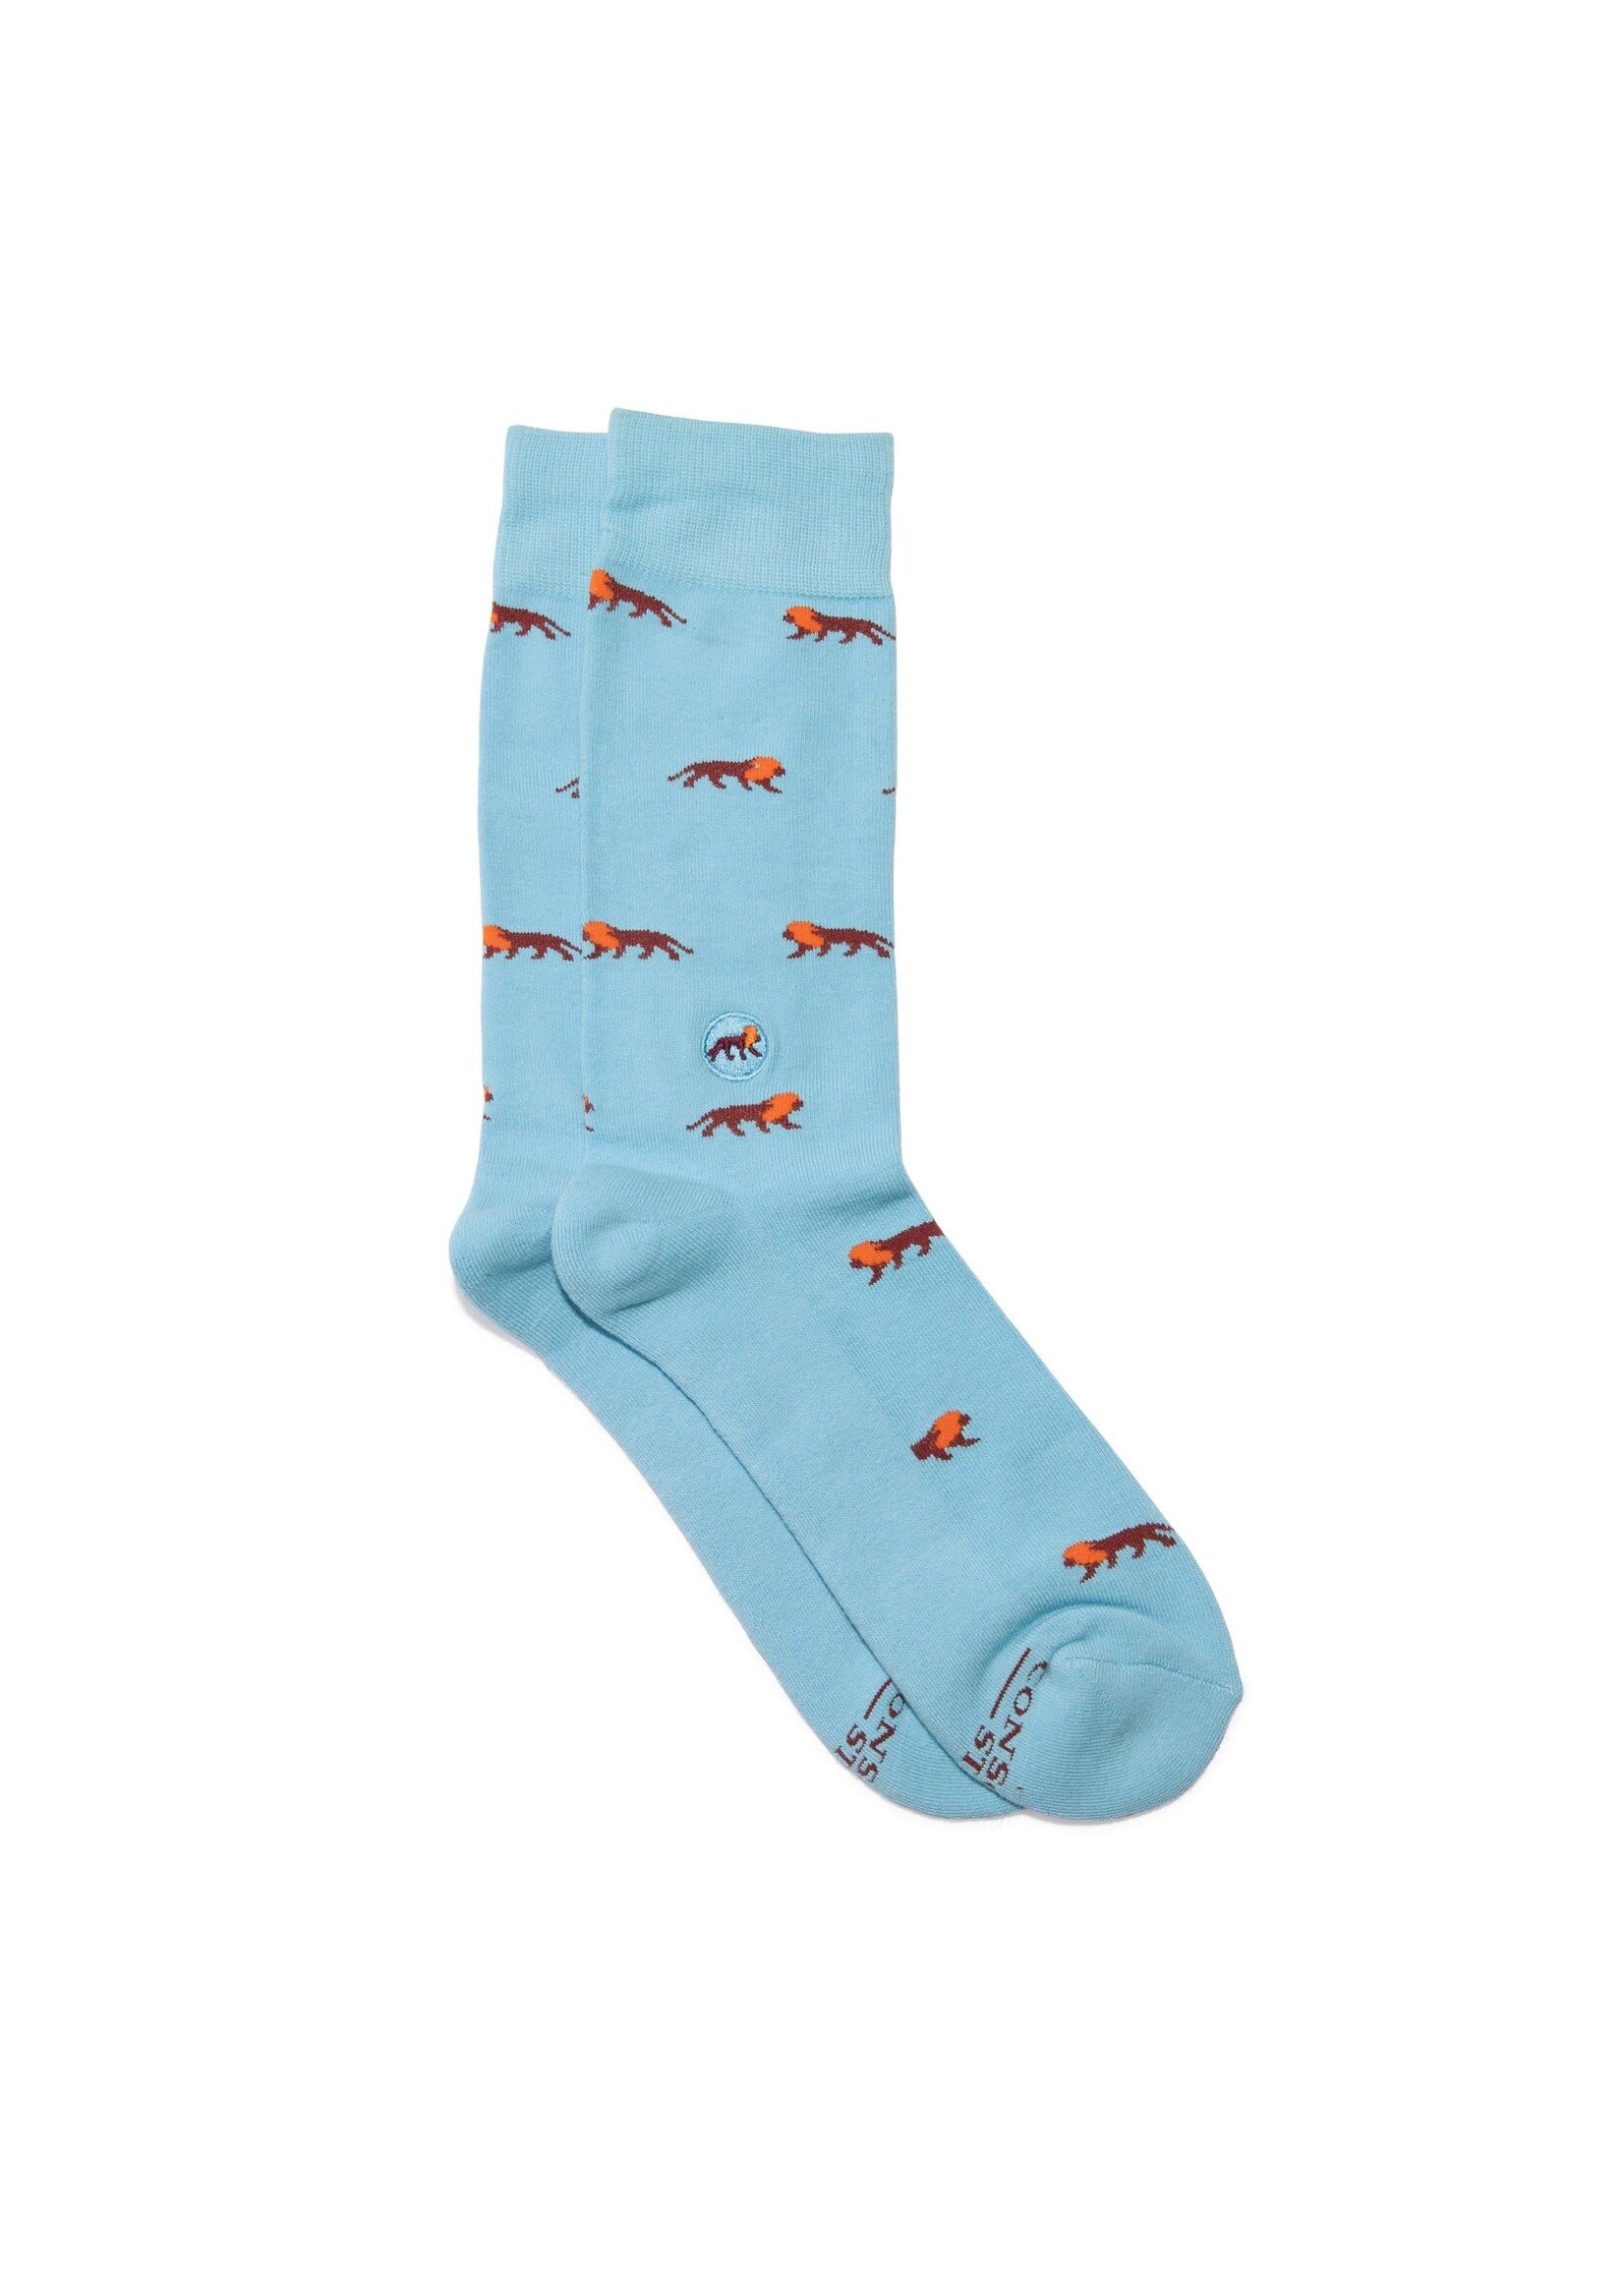 Socks That Protect Lions